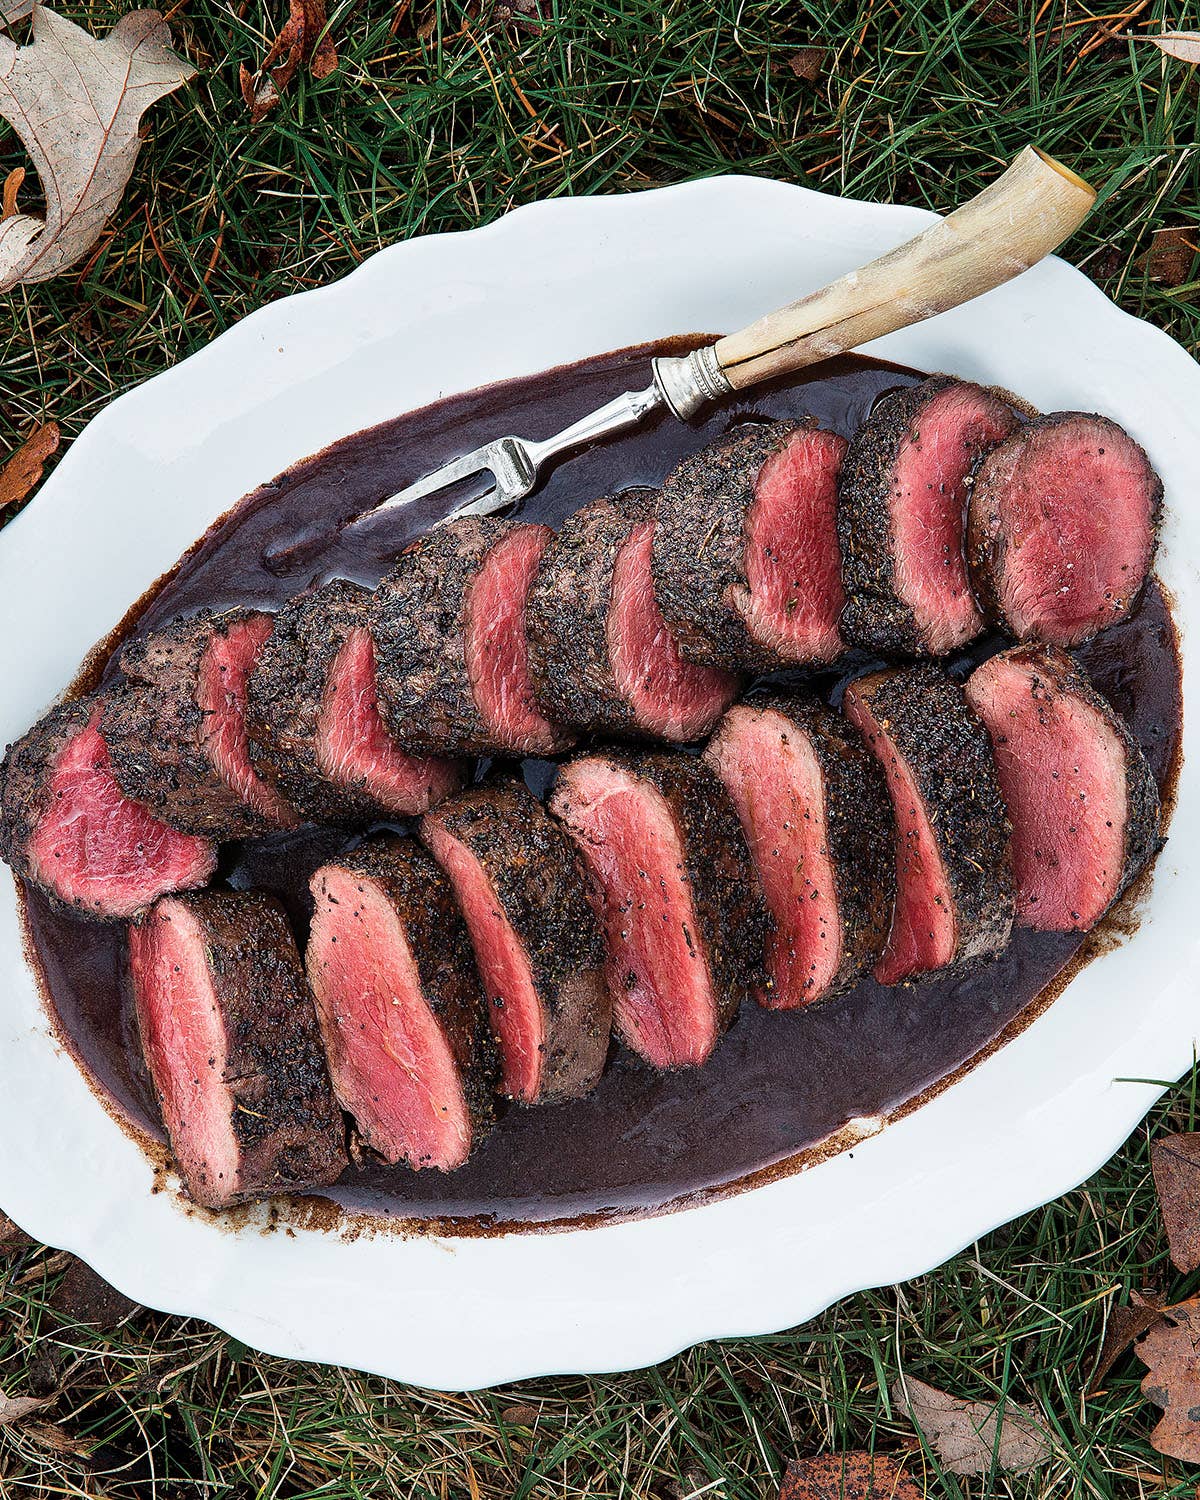 Spice-Rubbed Venison Loin with Red Wine Sauce